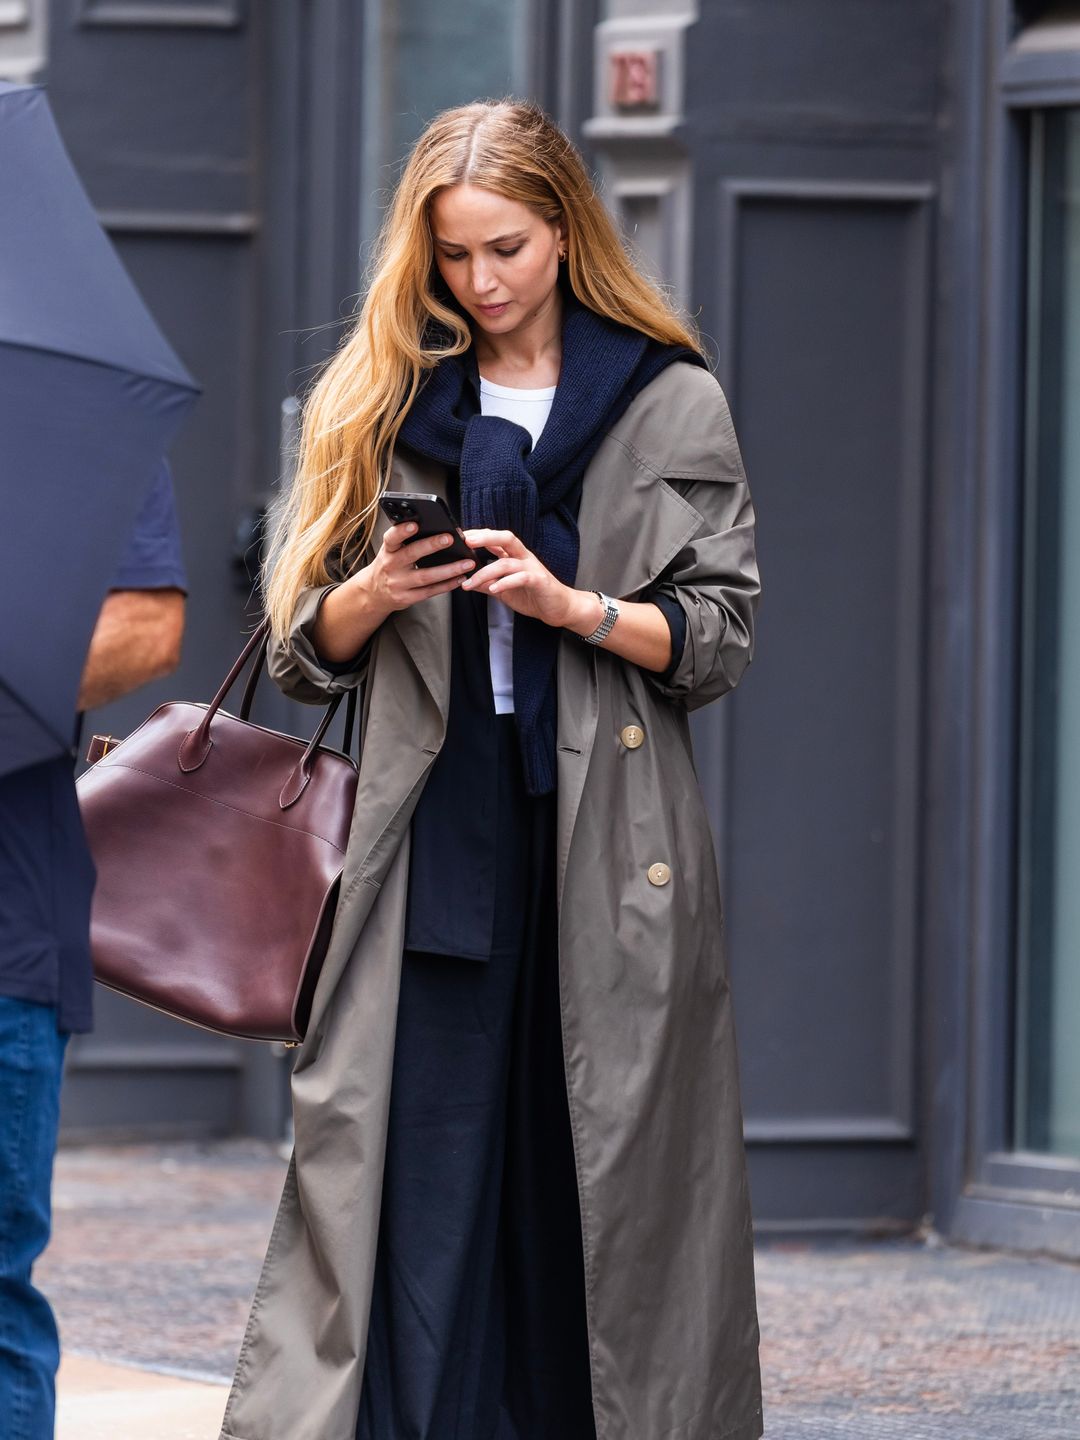 Jennifer Lawrence is seen in SoHo on June 28, 2023 wearing a long green trench coat over a navy blue suit